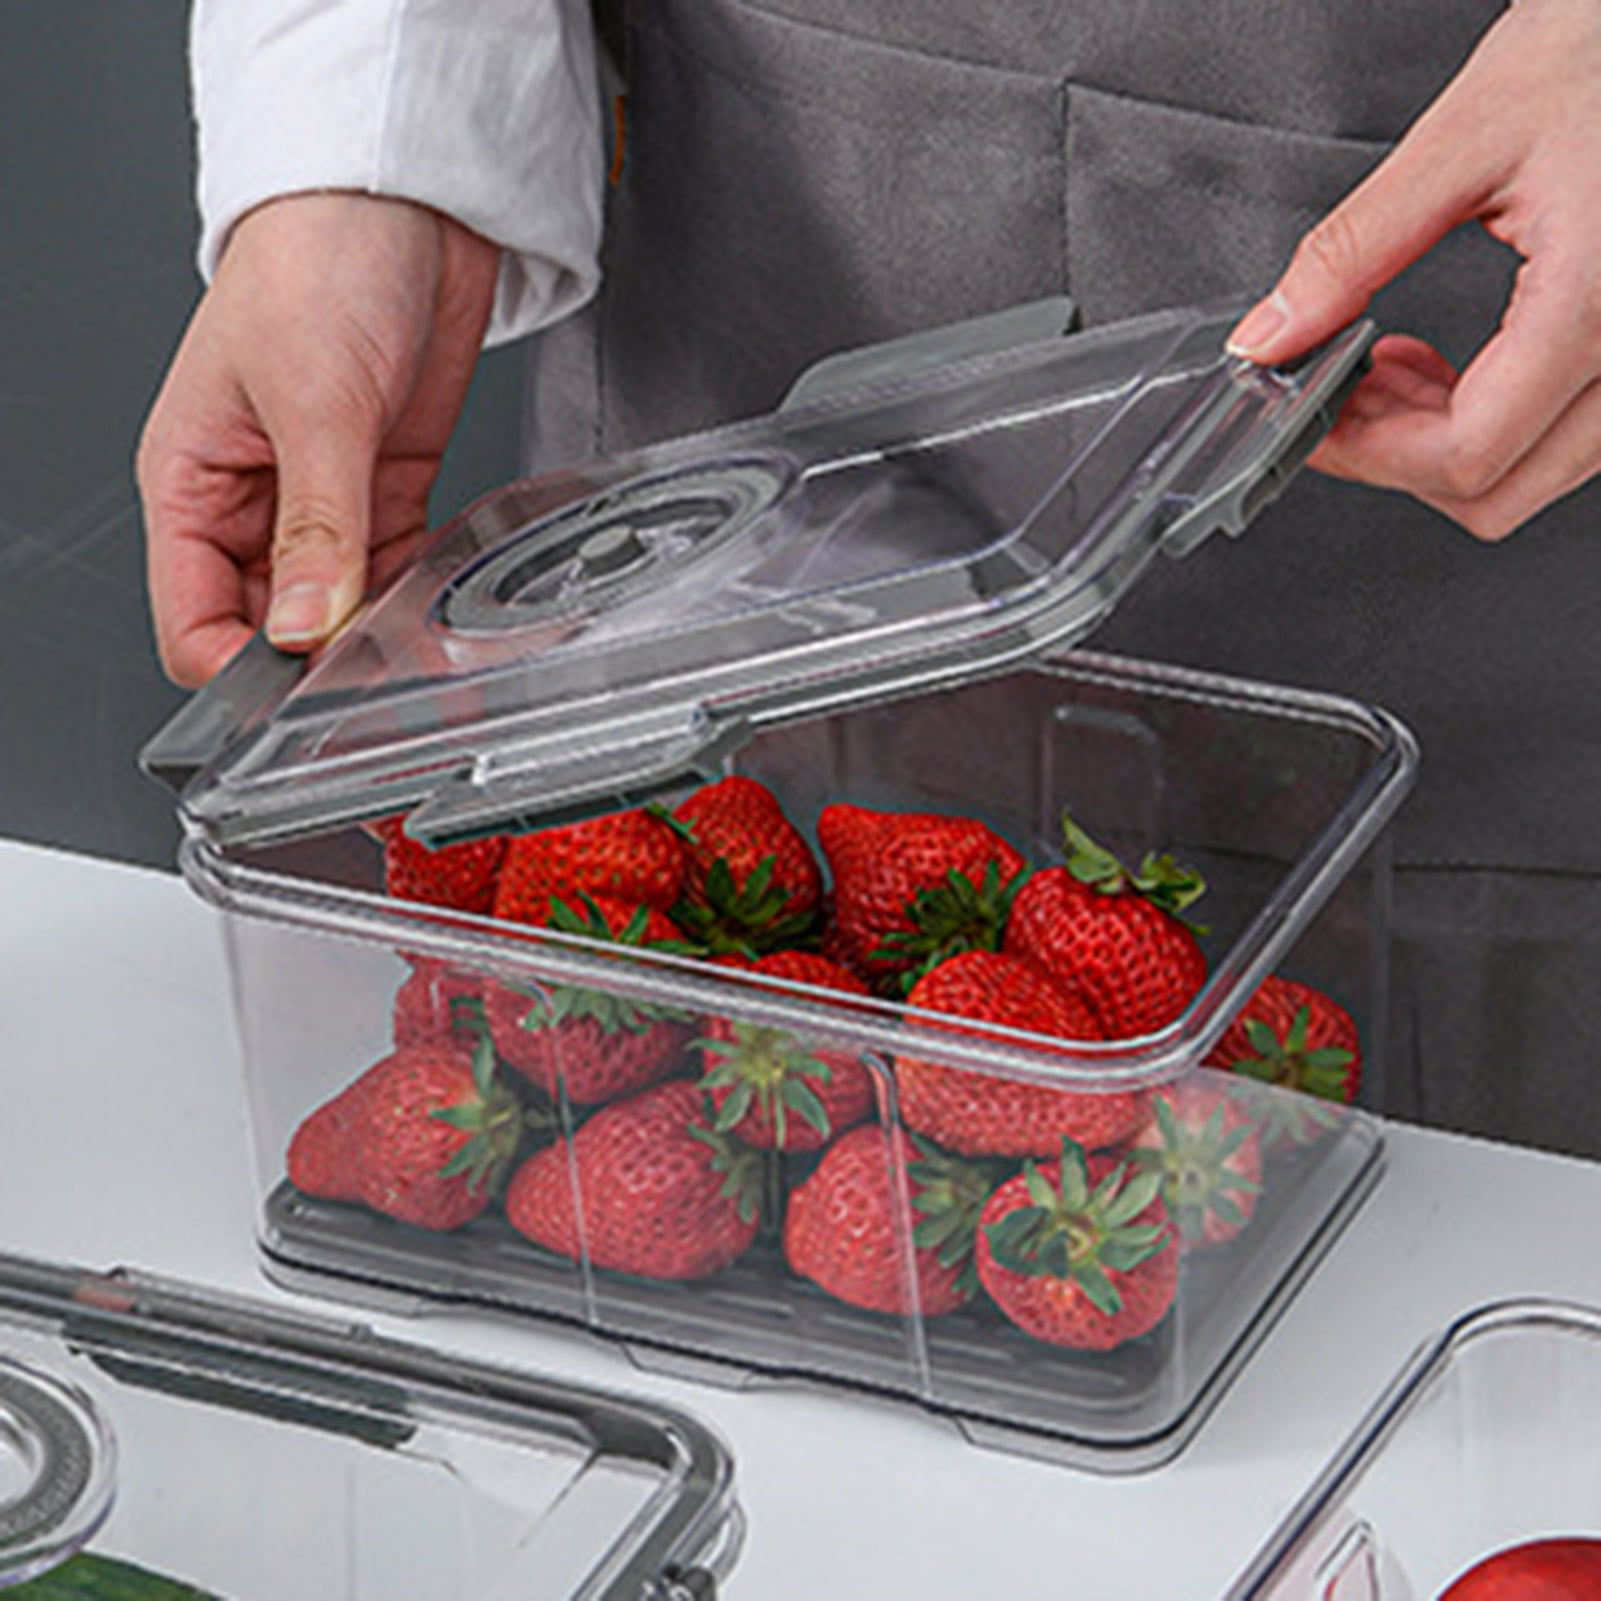 Qianha Mall Vacuum Seal Containers,Food Fresh %26 Save Container for Vacuum  Seal, Vacuum Container with Handheld Pump, Airtight Food Storage,Marinade  Container 